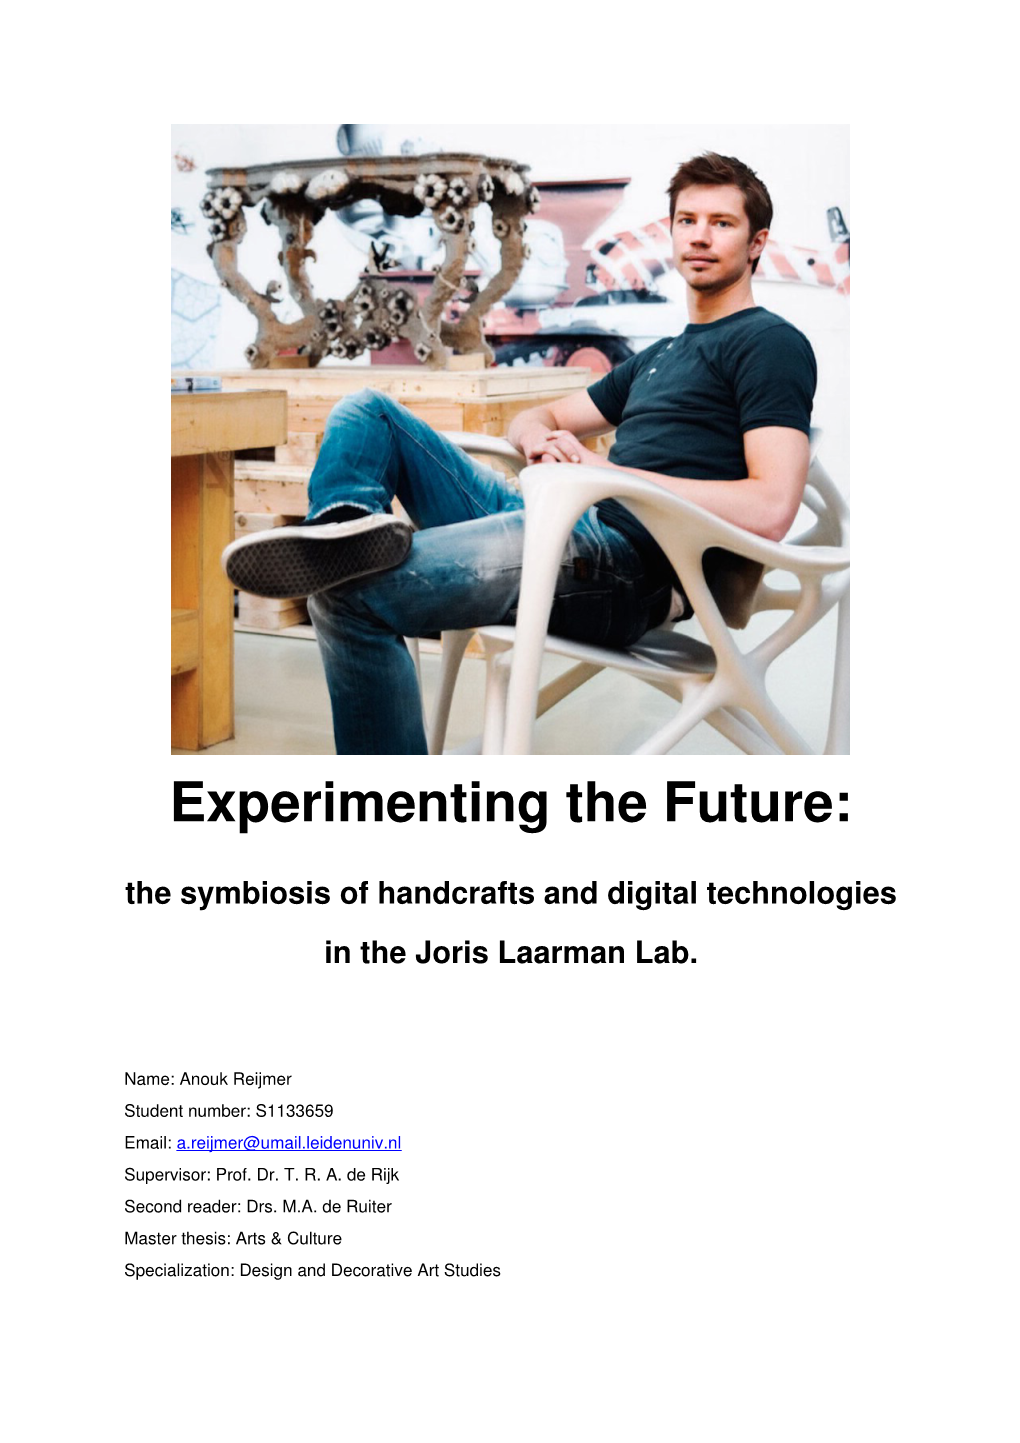 Experimenting the Future: the Symbiosis of Handcrafts and Digital Technologies in the Joris Laarman Lab